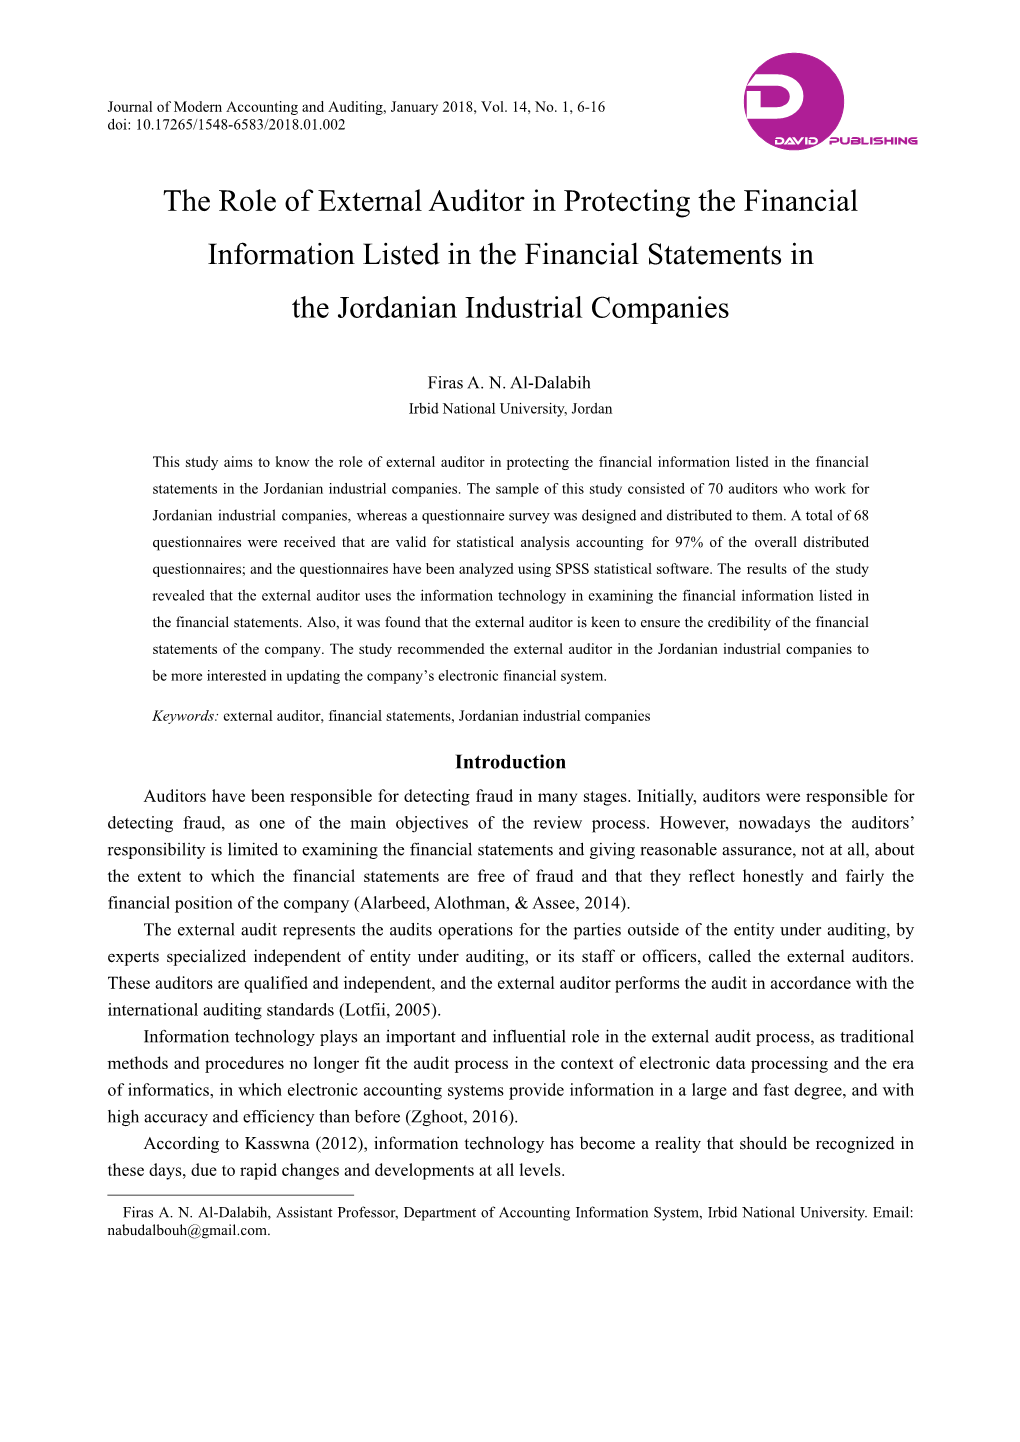 The Role of External Auditor in Protecting the Financial Information Listed in the Financial Statements in the Jordanian Industrial Companies